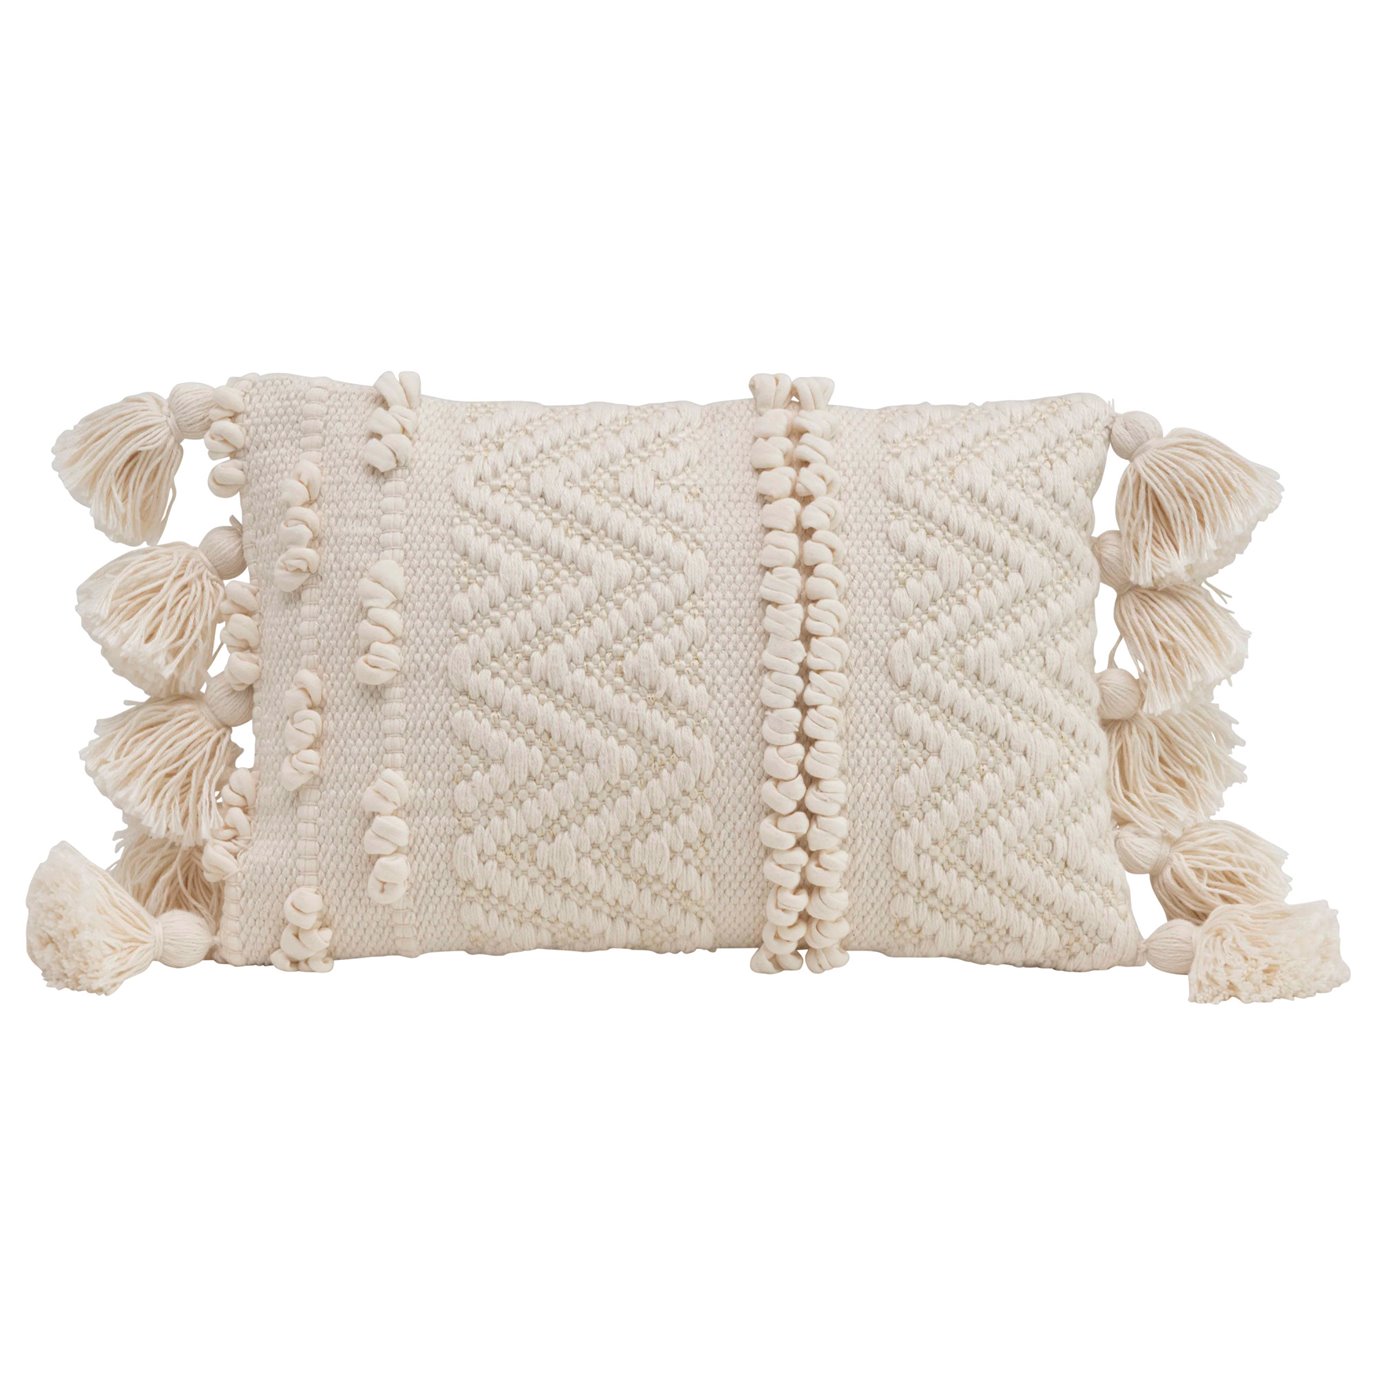 Rectangle Cotton Blend Lumbar Pillow with Thick Texture & Plush Tassels